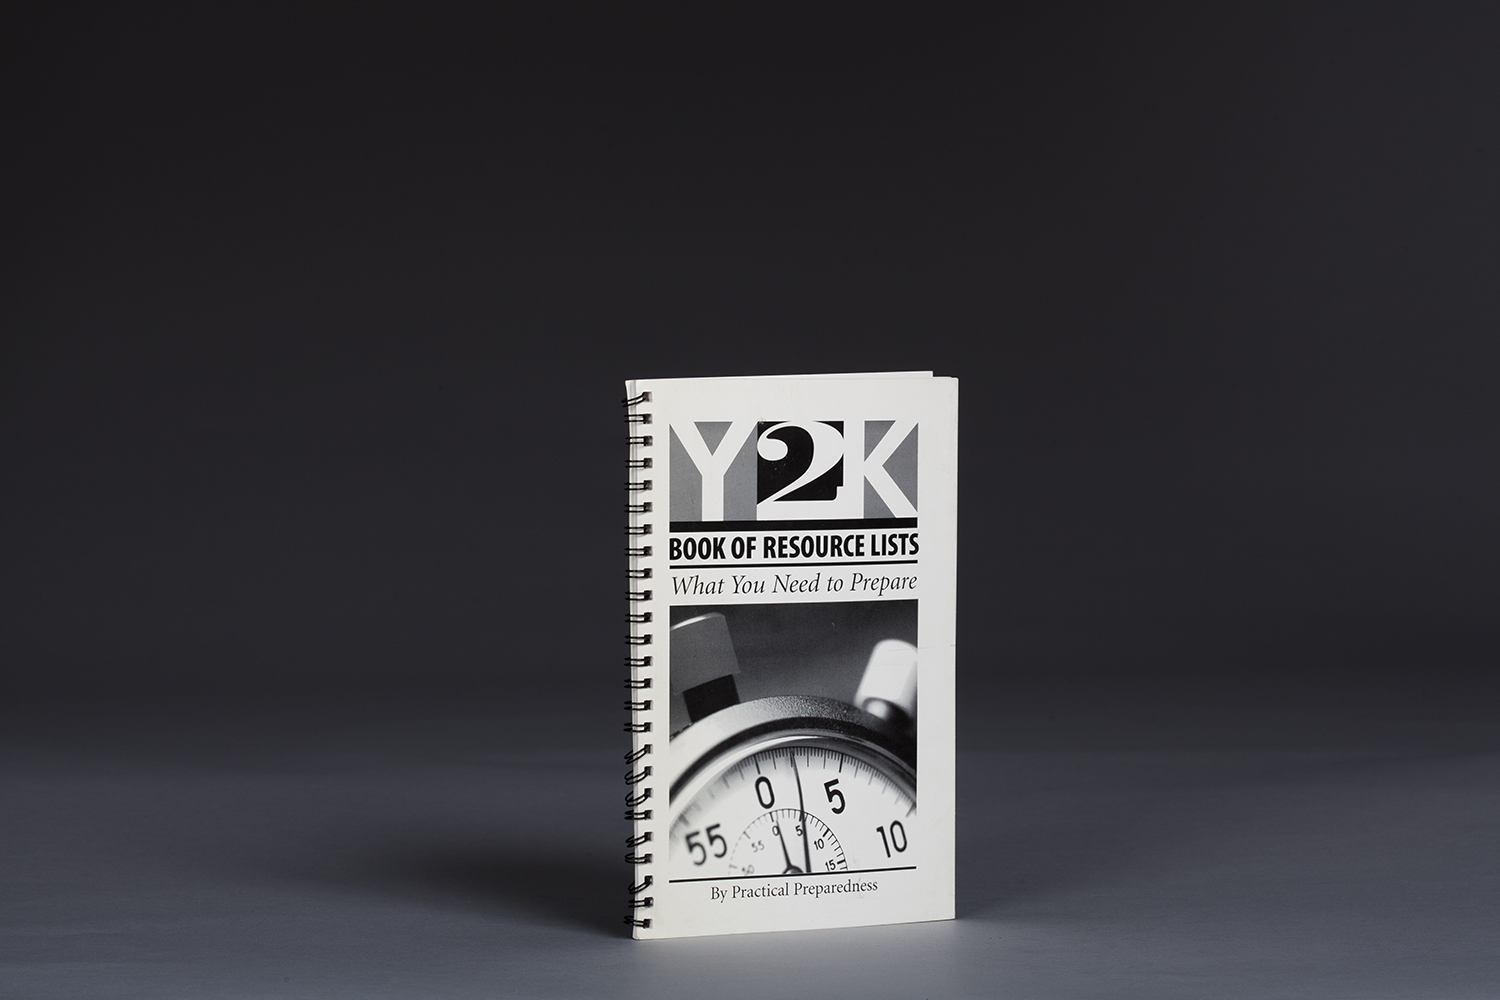 Y2K Book of Resource Lists - 9983 Cover.jpg